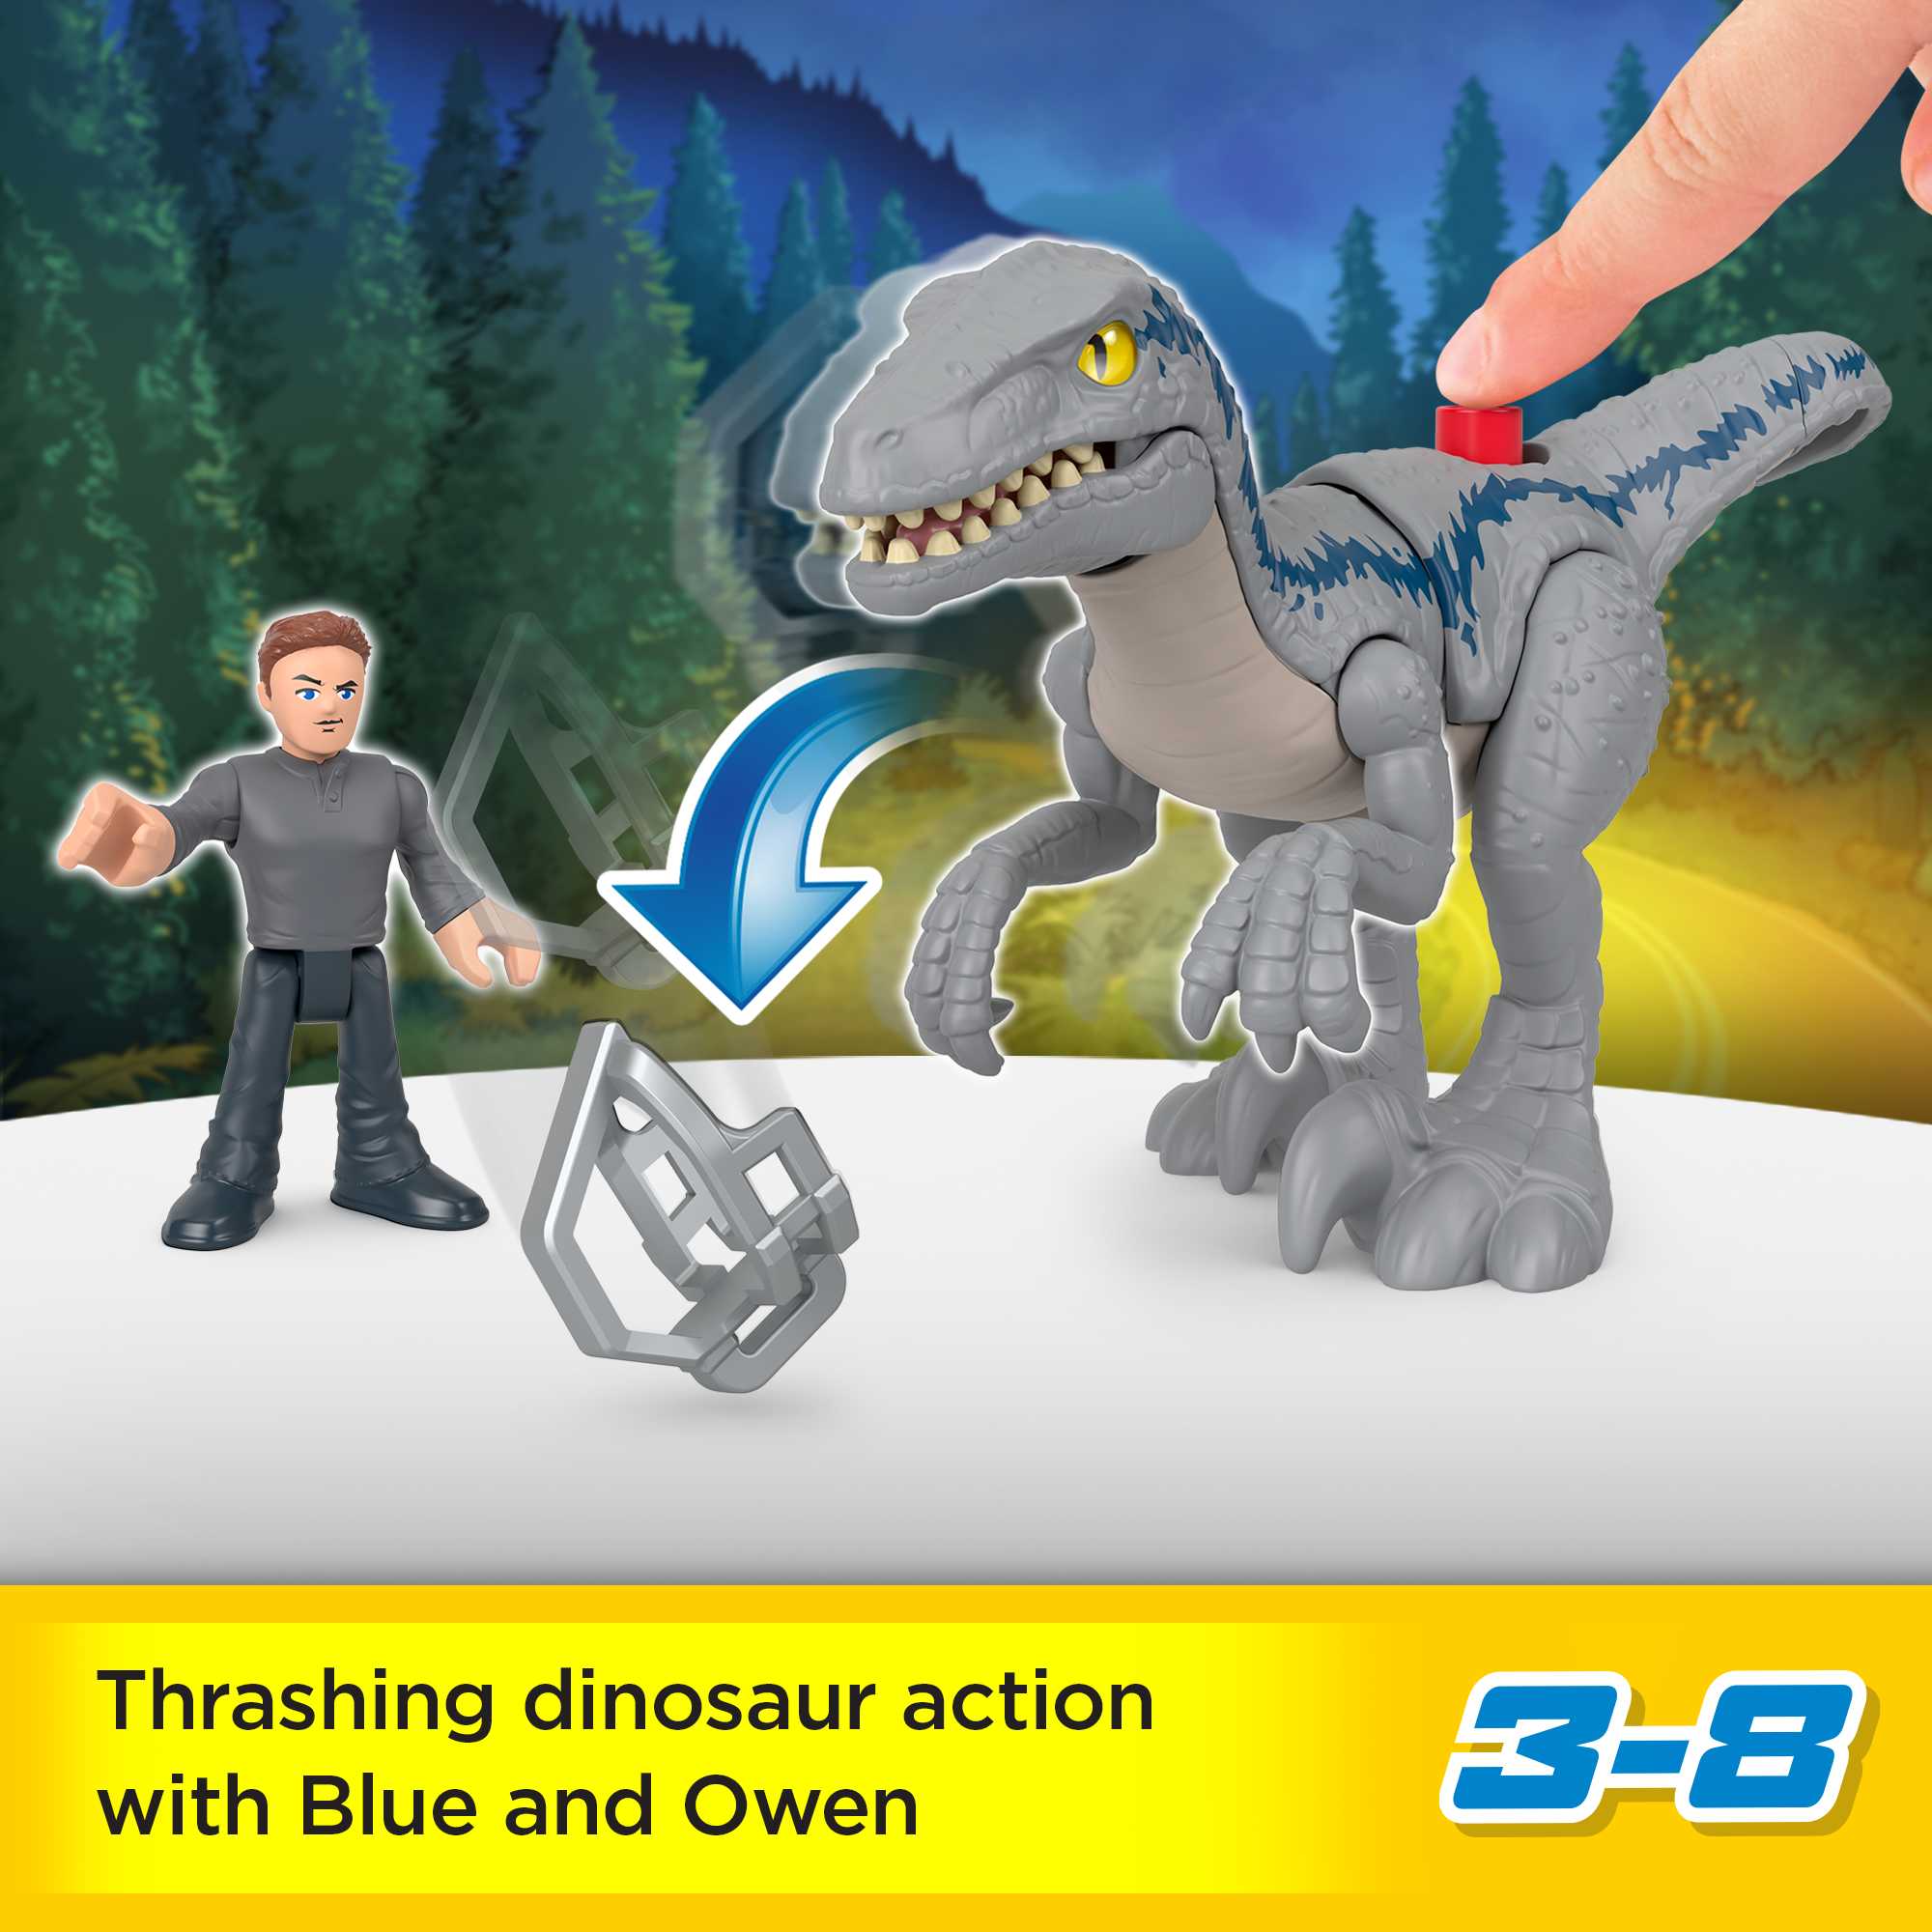 Fisher Price-Fisher-Price Imaginext - Jurassic World™ Breakout 'Blue'-HKG15-Legacy Toys